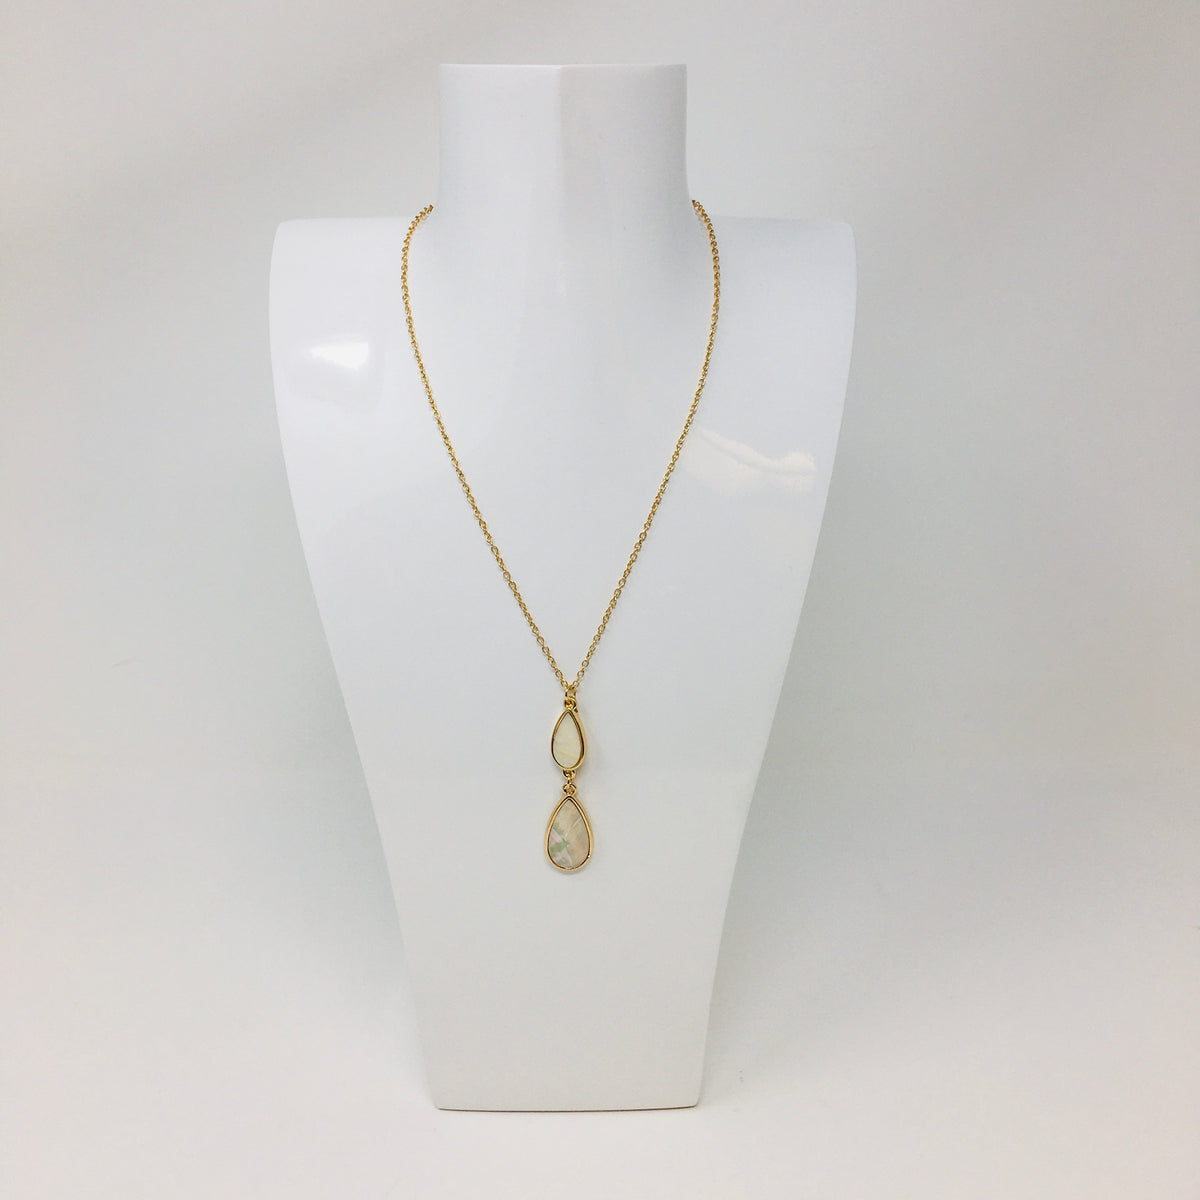 gold tone chain necklace with double teardrop pendant with mother of pearl inserts in the teardrops shown on a white bust form on white background